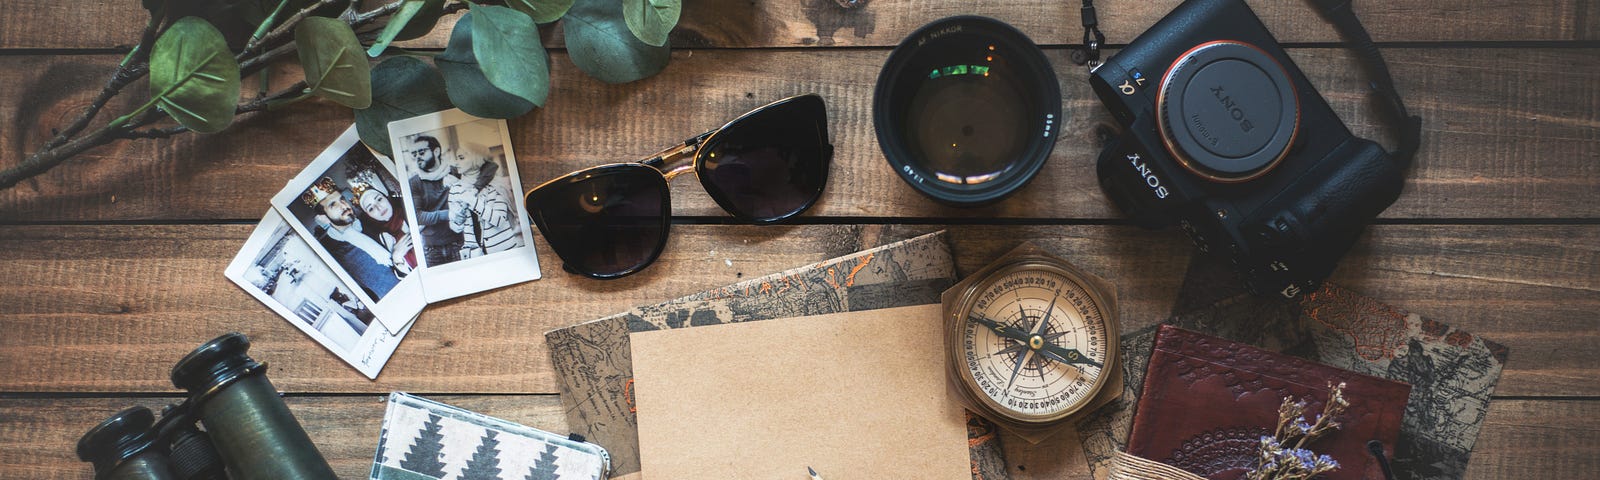 Travel items including sunglasses, camera, compass and journals